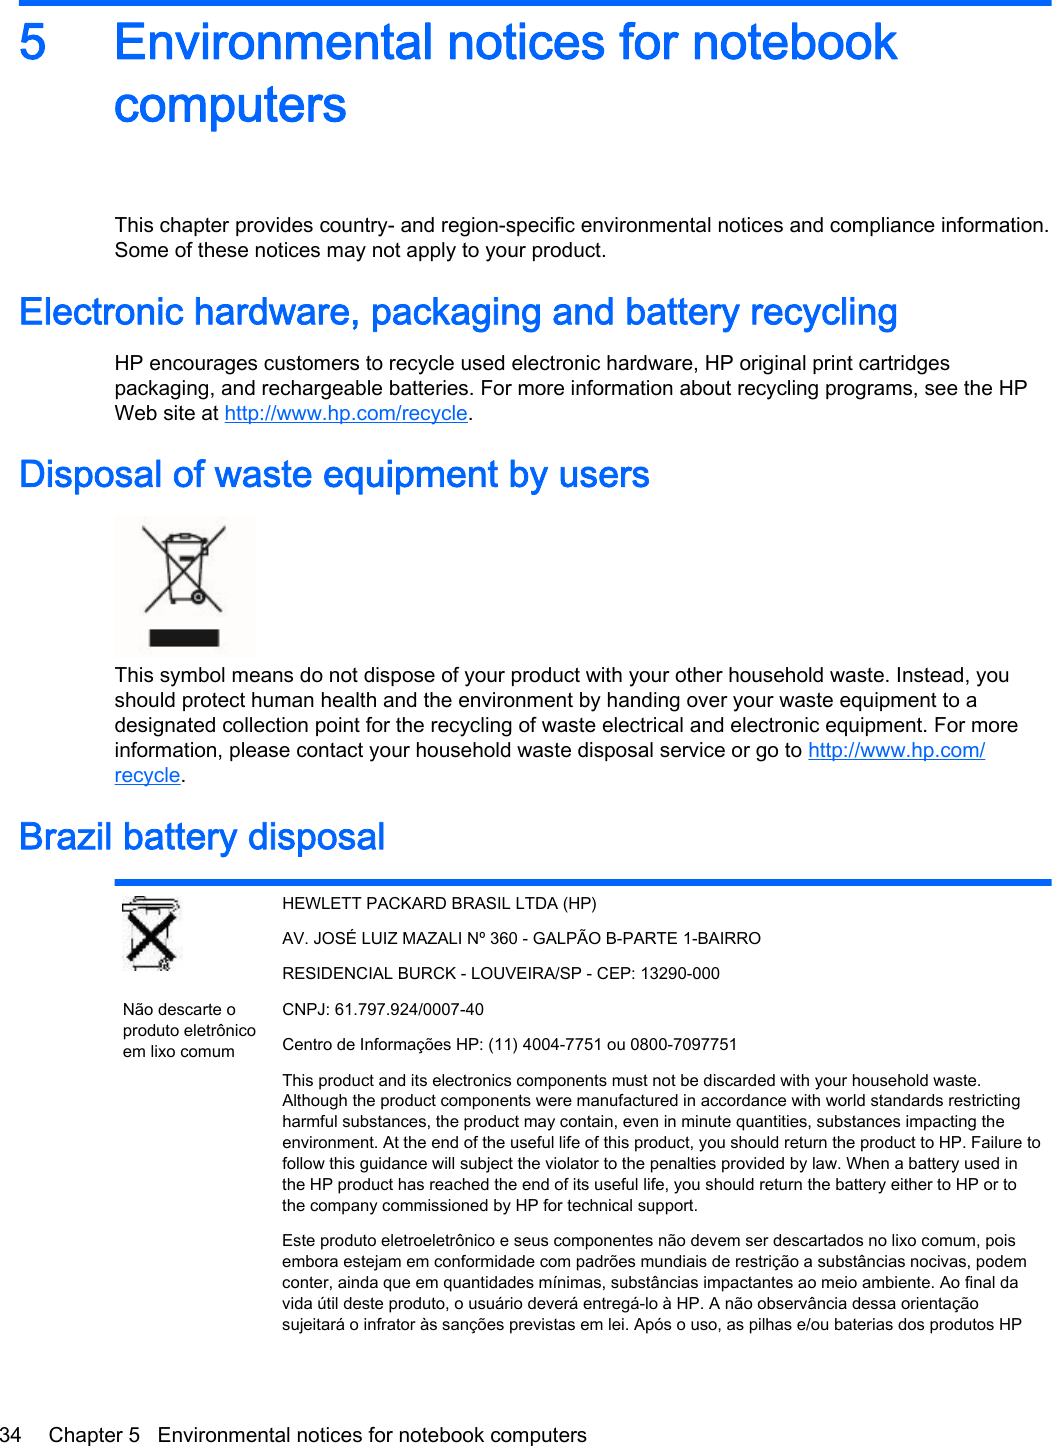 5 Environmental notices for notebookcomputersThis chapter provides country- and region-specific environmental notices and compliance information.Some of these notices may not apply to your product.Electronic hardware, packaging and battery recyclingHP encourages customers to recycle used electronic hardware, HP original print cartridgespackaging, and rechargeable batteries. For more information about recycling programs, see the HPWeb site at http://www.hp.com/recycle.Disposal of waste equipment by usersThis symbol means do not dispose of your product with your other household waste. Instead, youshould protect human health and the environment by handing over your waste equipment to adesignated collection point for the recycling of waste electrical and electronic equipment. For moreinformation, please contact your household waste disposal service or go to http://www.hp.com/recycle.Brazil battery disposalNão descarte oproduto eletrônicoem lixo comumHEWLETT PACKARD BRASIL LTDA (HP)AV. JOSÉ LUIZ MAZALI Nº 360 - GALPÃO B-PARTE 1-BAIRRORESIDENCIAL BURCK - LOUVEIRA/SP - CEP: 13290-000CNPJ: 61.797.924/0007-40Centro de Informações HP: (11) 4004-7751 ou 0800-7097751This product and its electronics components must not be discarded with your household waste.Although the product components were manufactured in accordance with world standards restrictingharmful substances, the product may contain, even in minute quantities, substances impacting theenvironment. At the end of the useful life of this product, you should return the product to HP. Failure tofollow this guidance will subject the violator to the penalties provided by law. When a battery used inthe HP product has reached the end of its useful life, you should return the battery either to HP or tothe company commissioned by HP for technical support.Este produto eletroeletrônico e seus componentes não devem ser descartados no lixo comum, poisembora estejam em conformidade com padrões mundiais de restrição a substâncias nocivas, podemconter, ainda que em quantidades mínimas, substâncias impactantes ao meio ambiente. Ao final davida útil deste produto, o usuário deverá entregá-lo à HP. A não observância dessa orientaçãosujeitará o infrator às sanções previstas em lei. Após o uso, as pilhas e/ou baterias dos produtos HP34 Chapter 5   Environmental notices for notebook computers